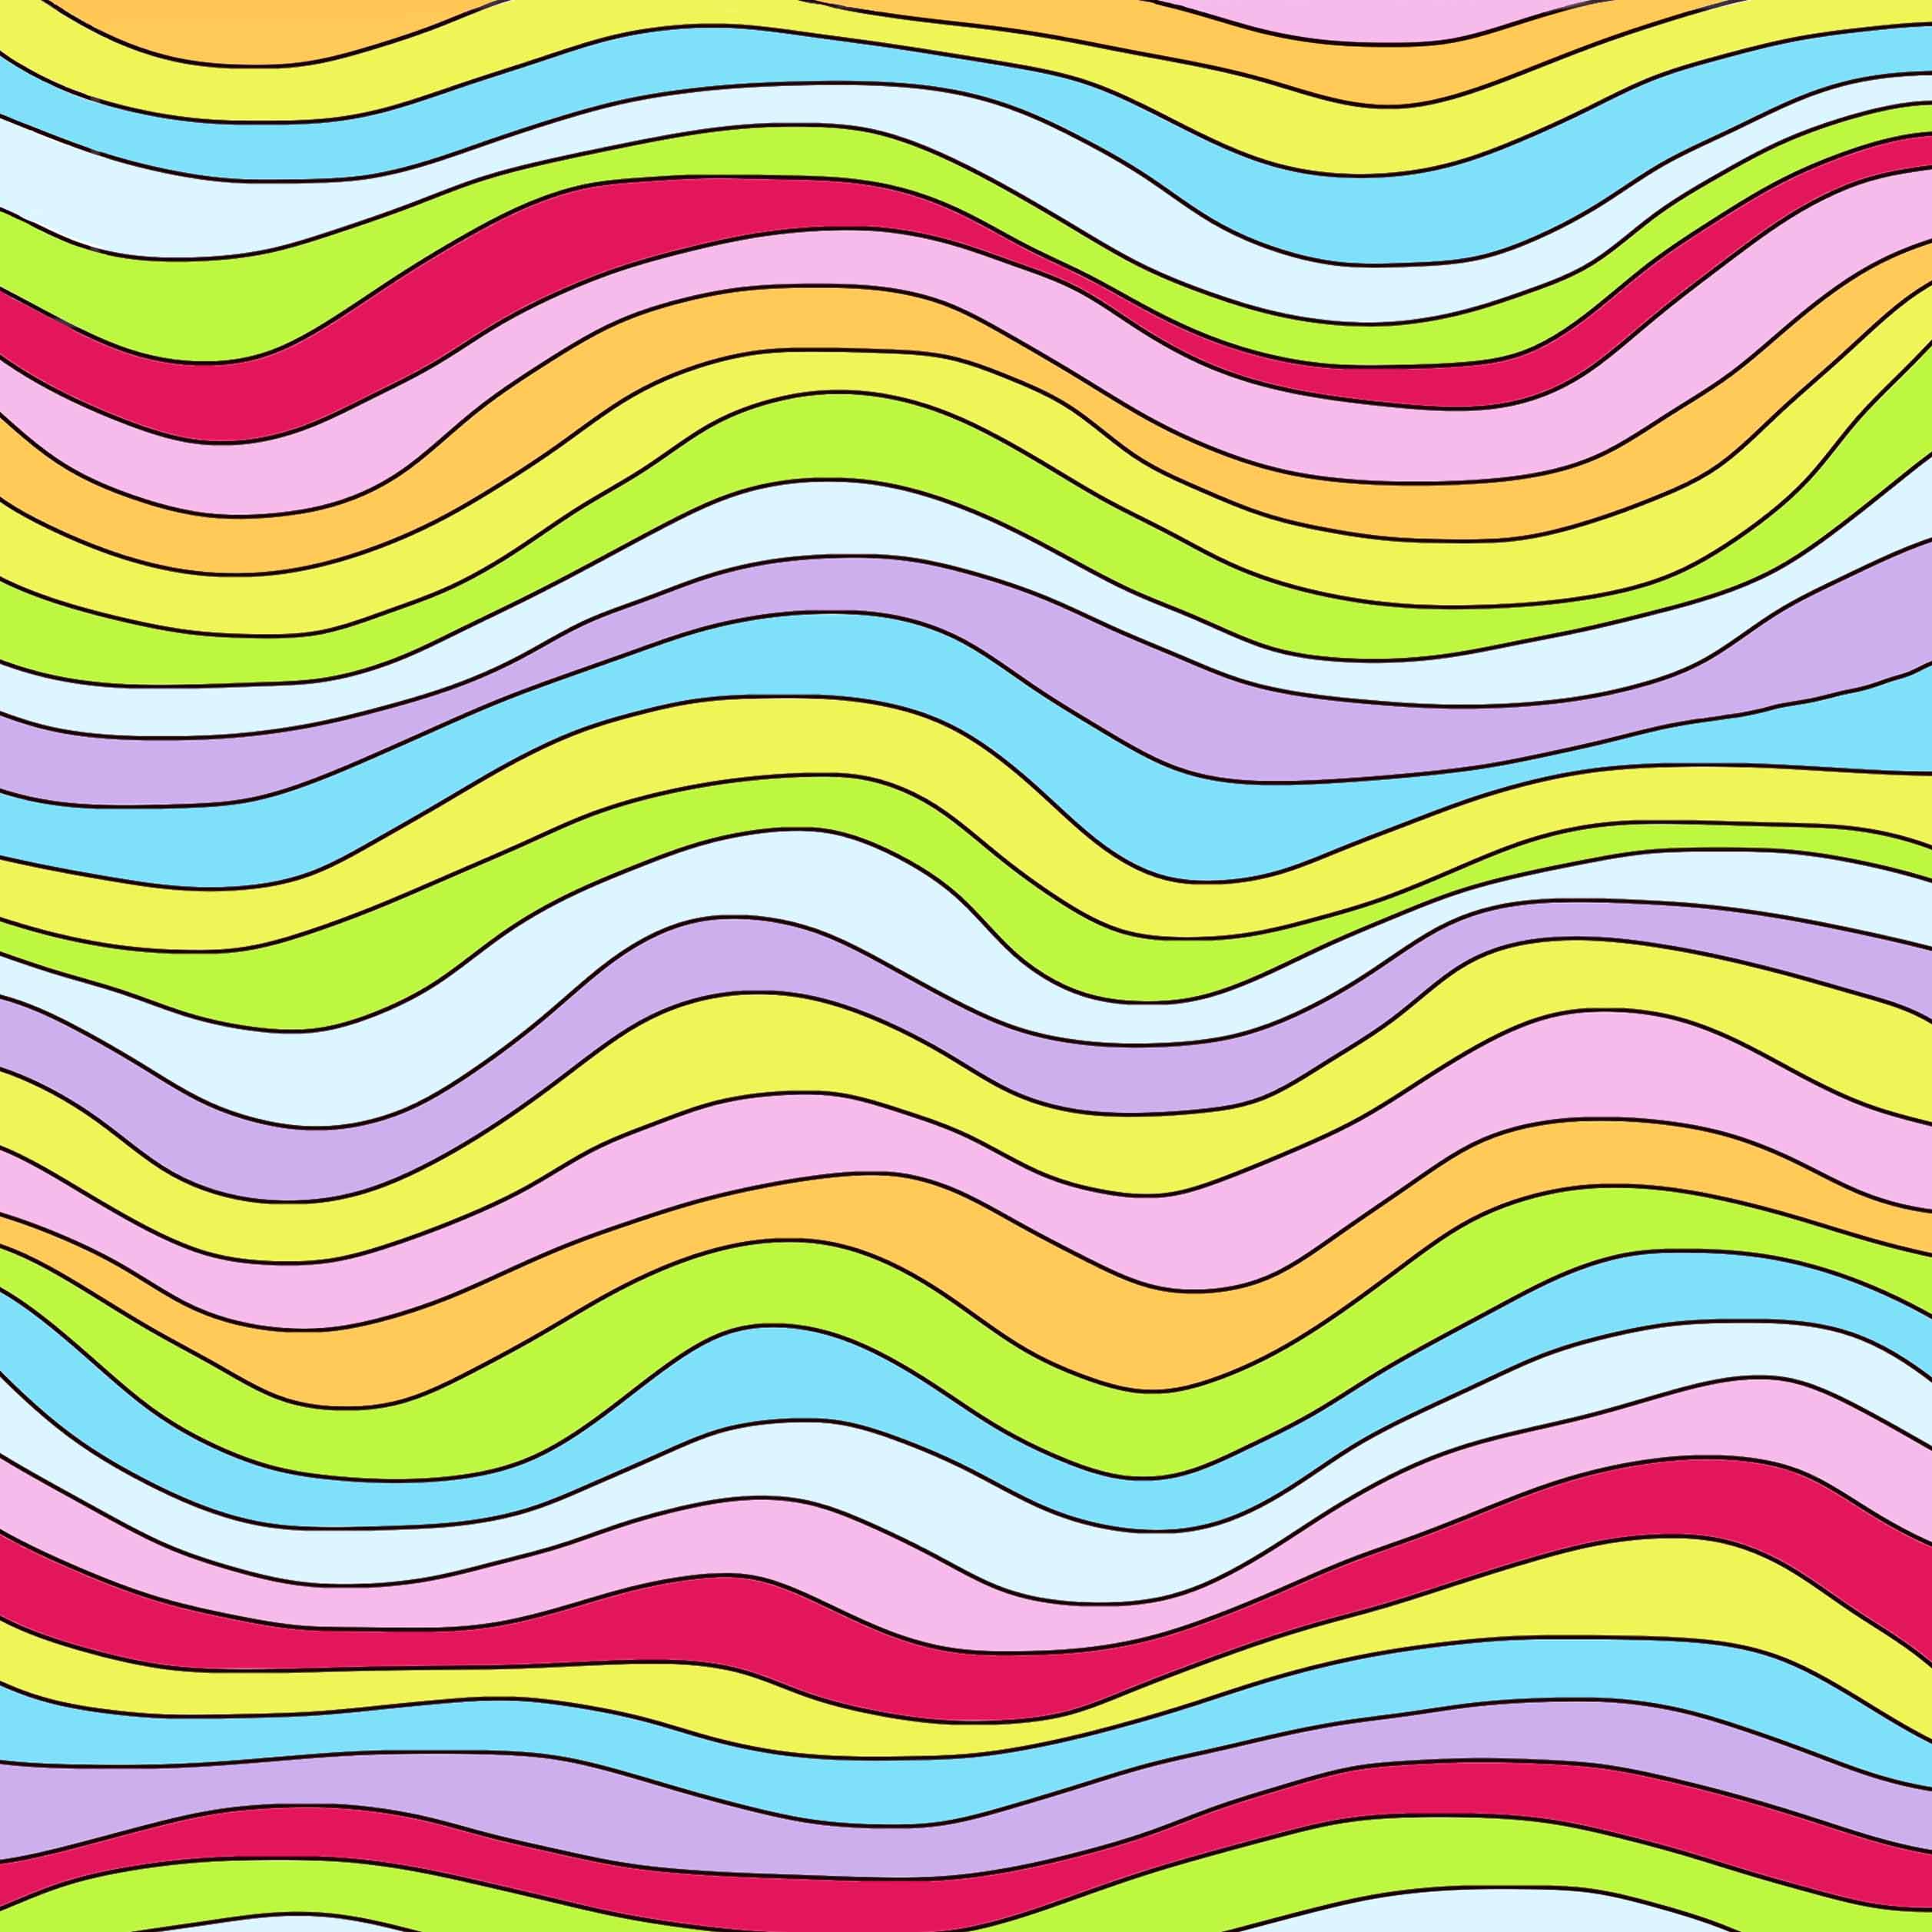 art every day number 124 / pattern / digital / waves